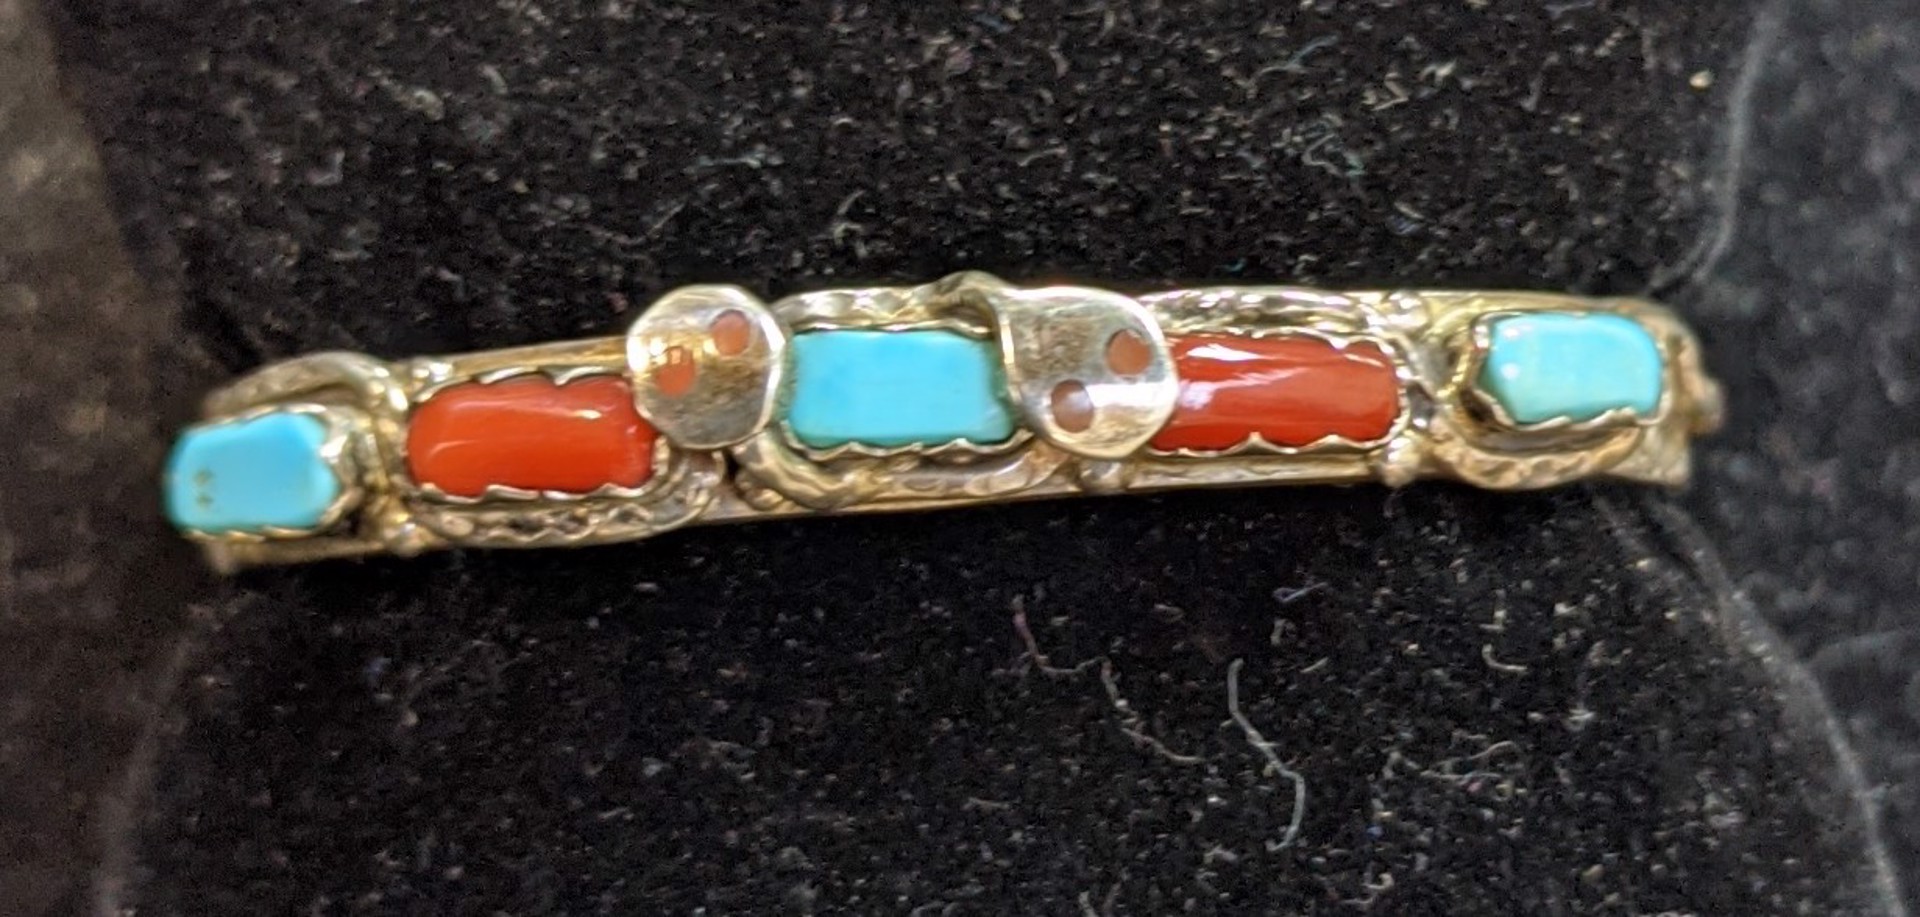 Sleeping Beauty Rattle Snakes Carnelian and Turquoise Sterling Bracelet by Marti Branson